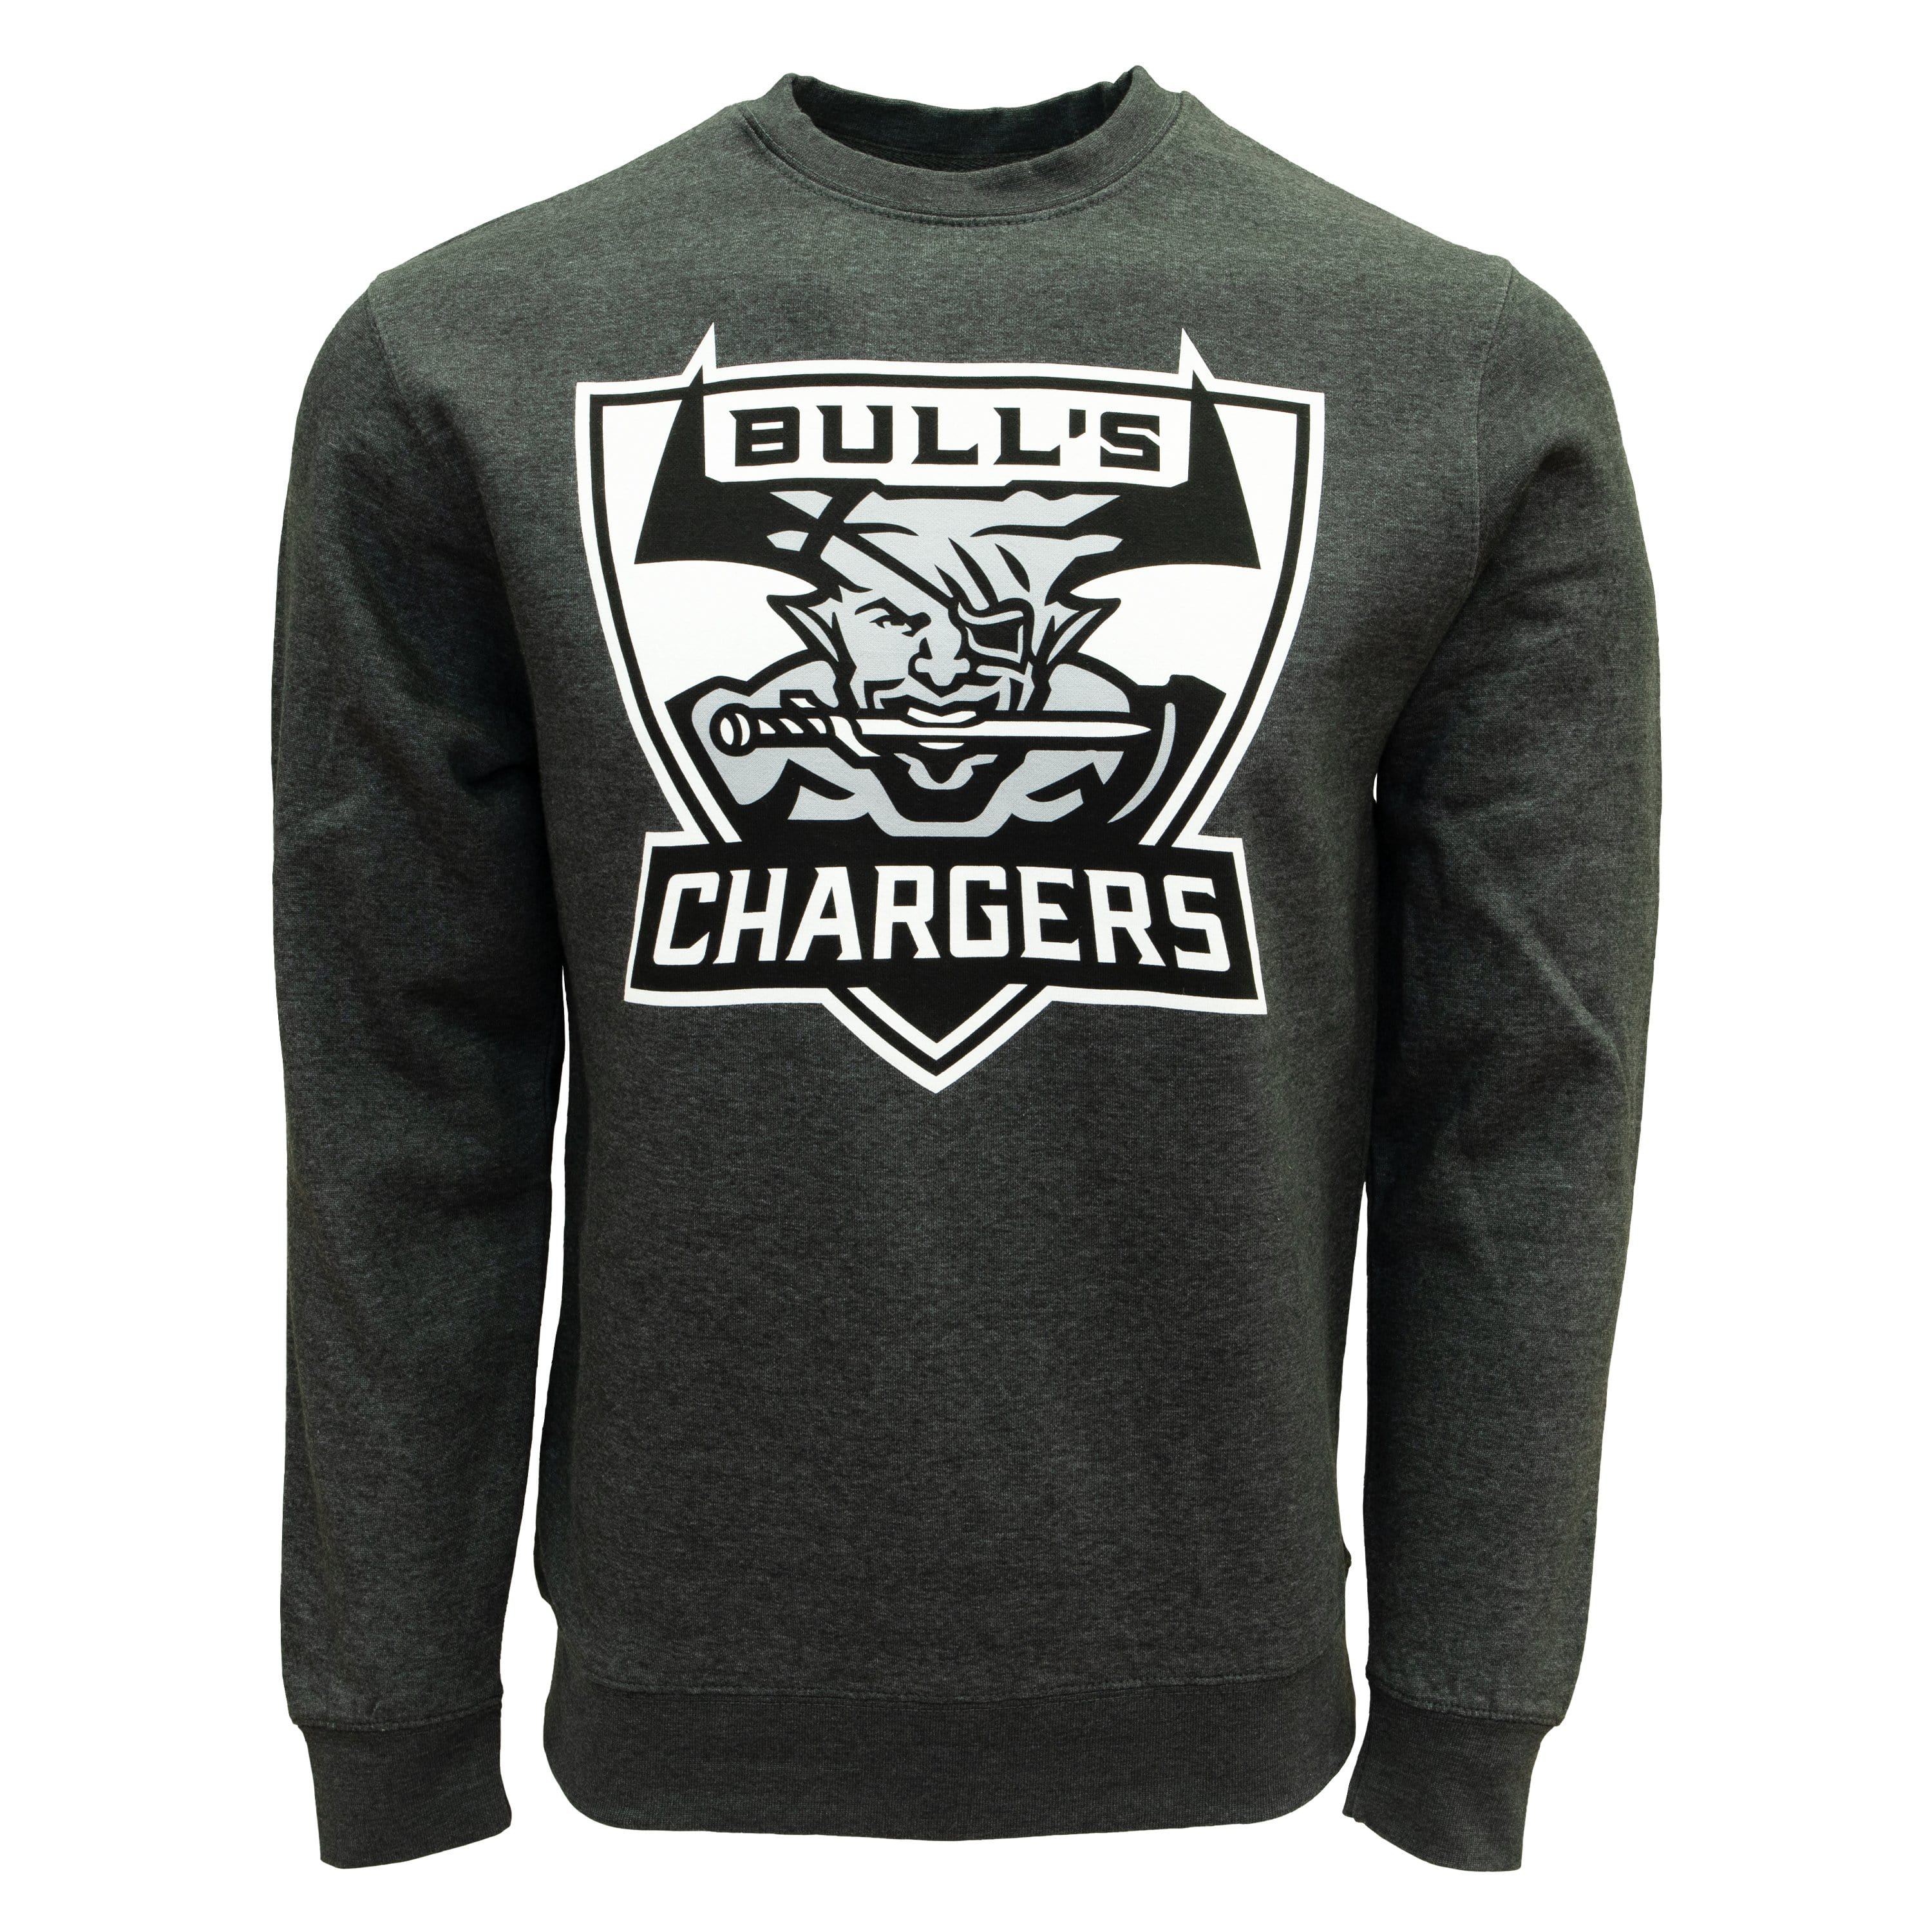 Dragon Age - Bull's Chargers Unisex Crewneck